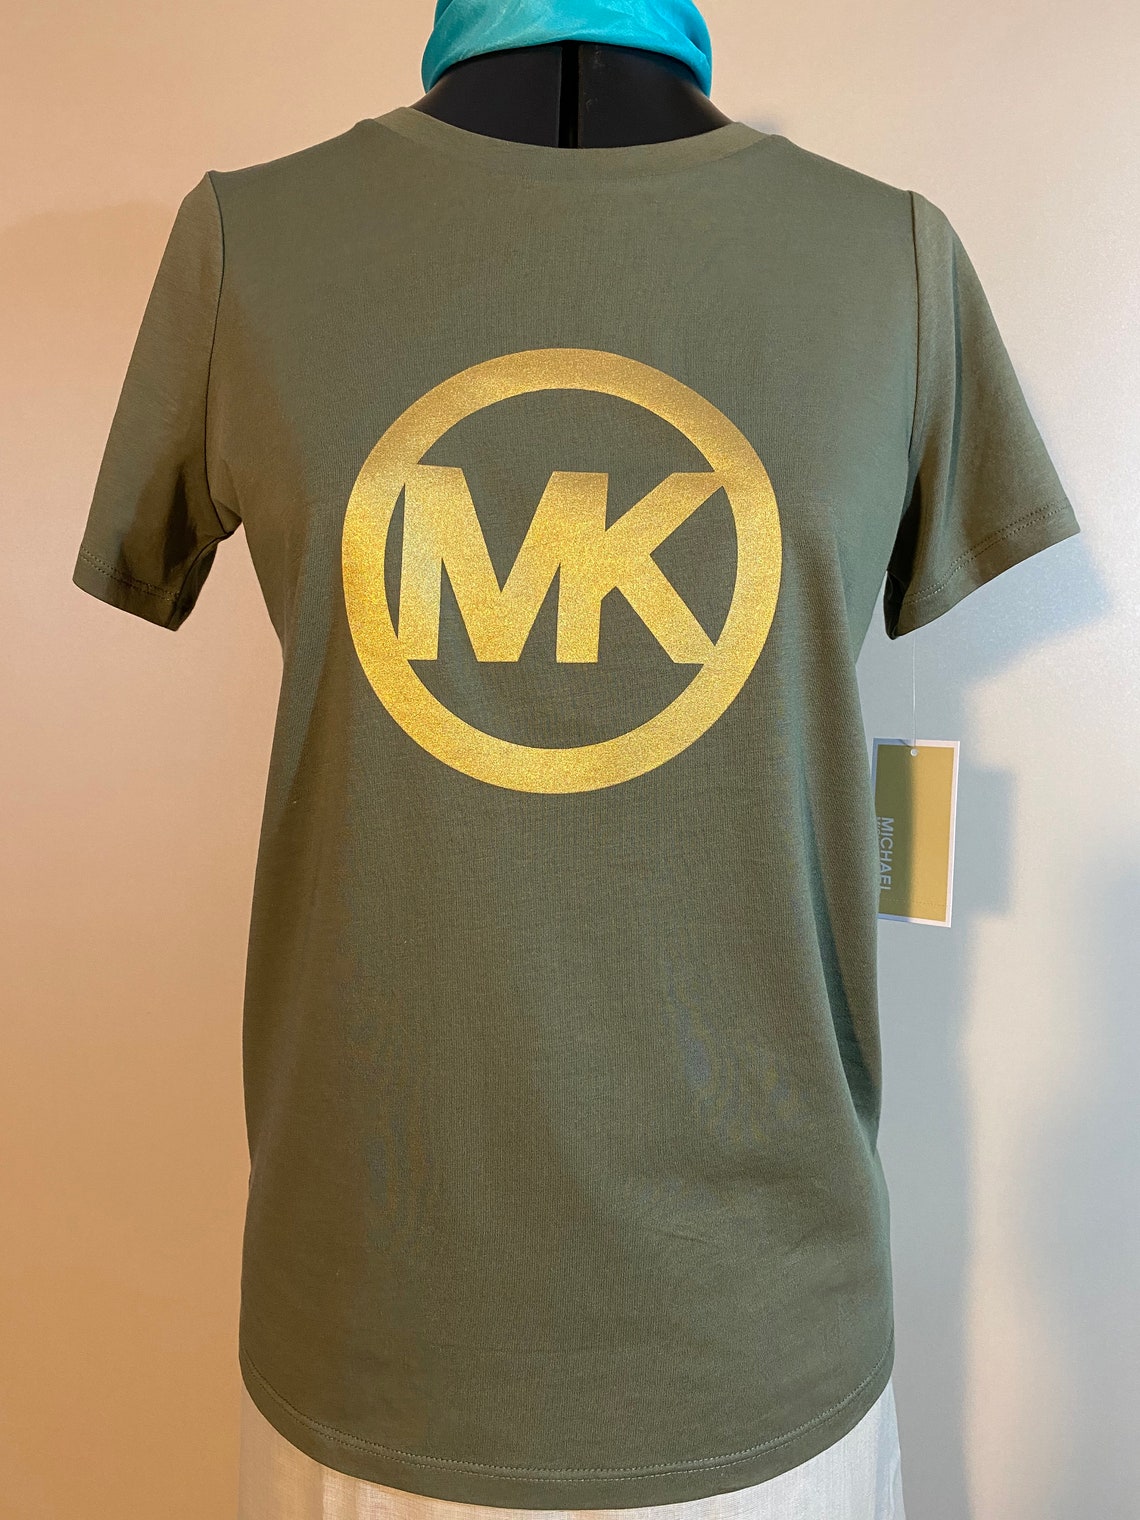 Womens T-shirt Michael Kors army green size-XS and size-M. | Etsy